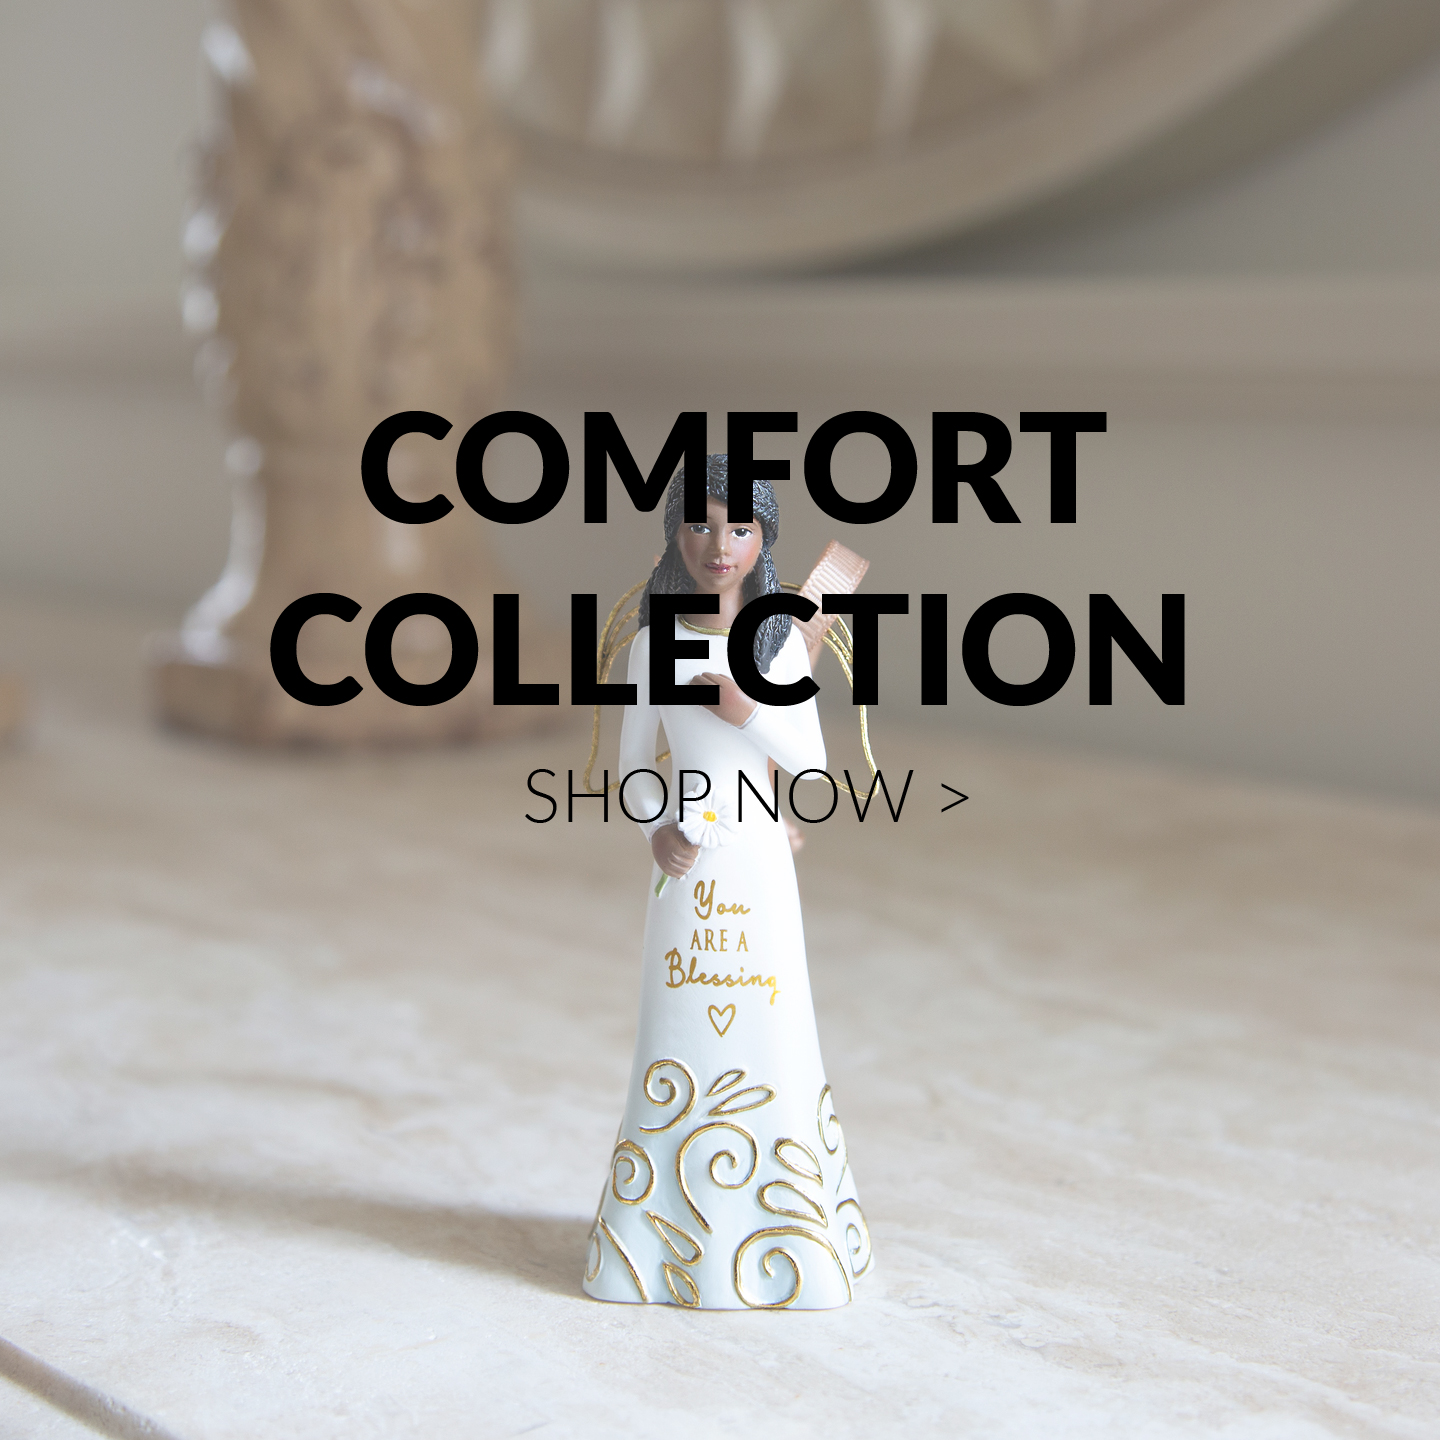 Comfort Collection